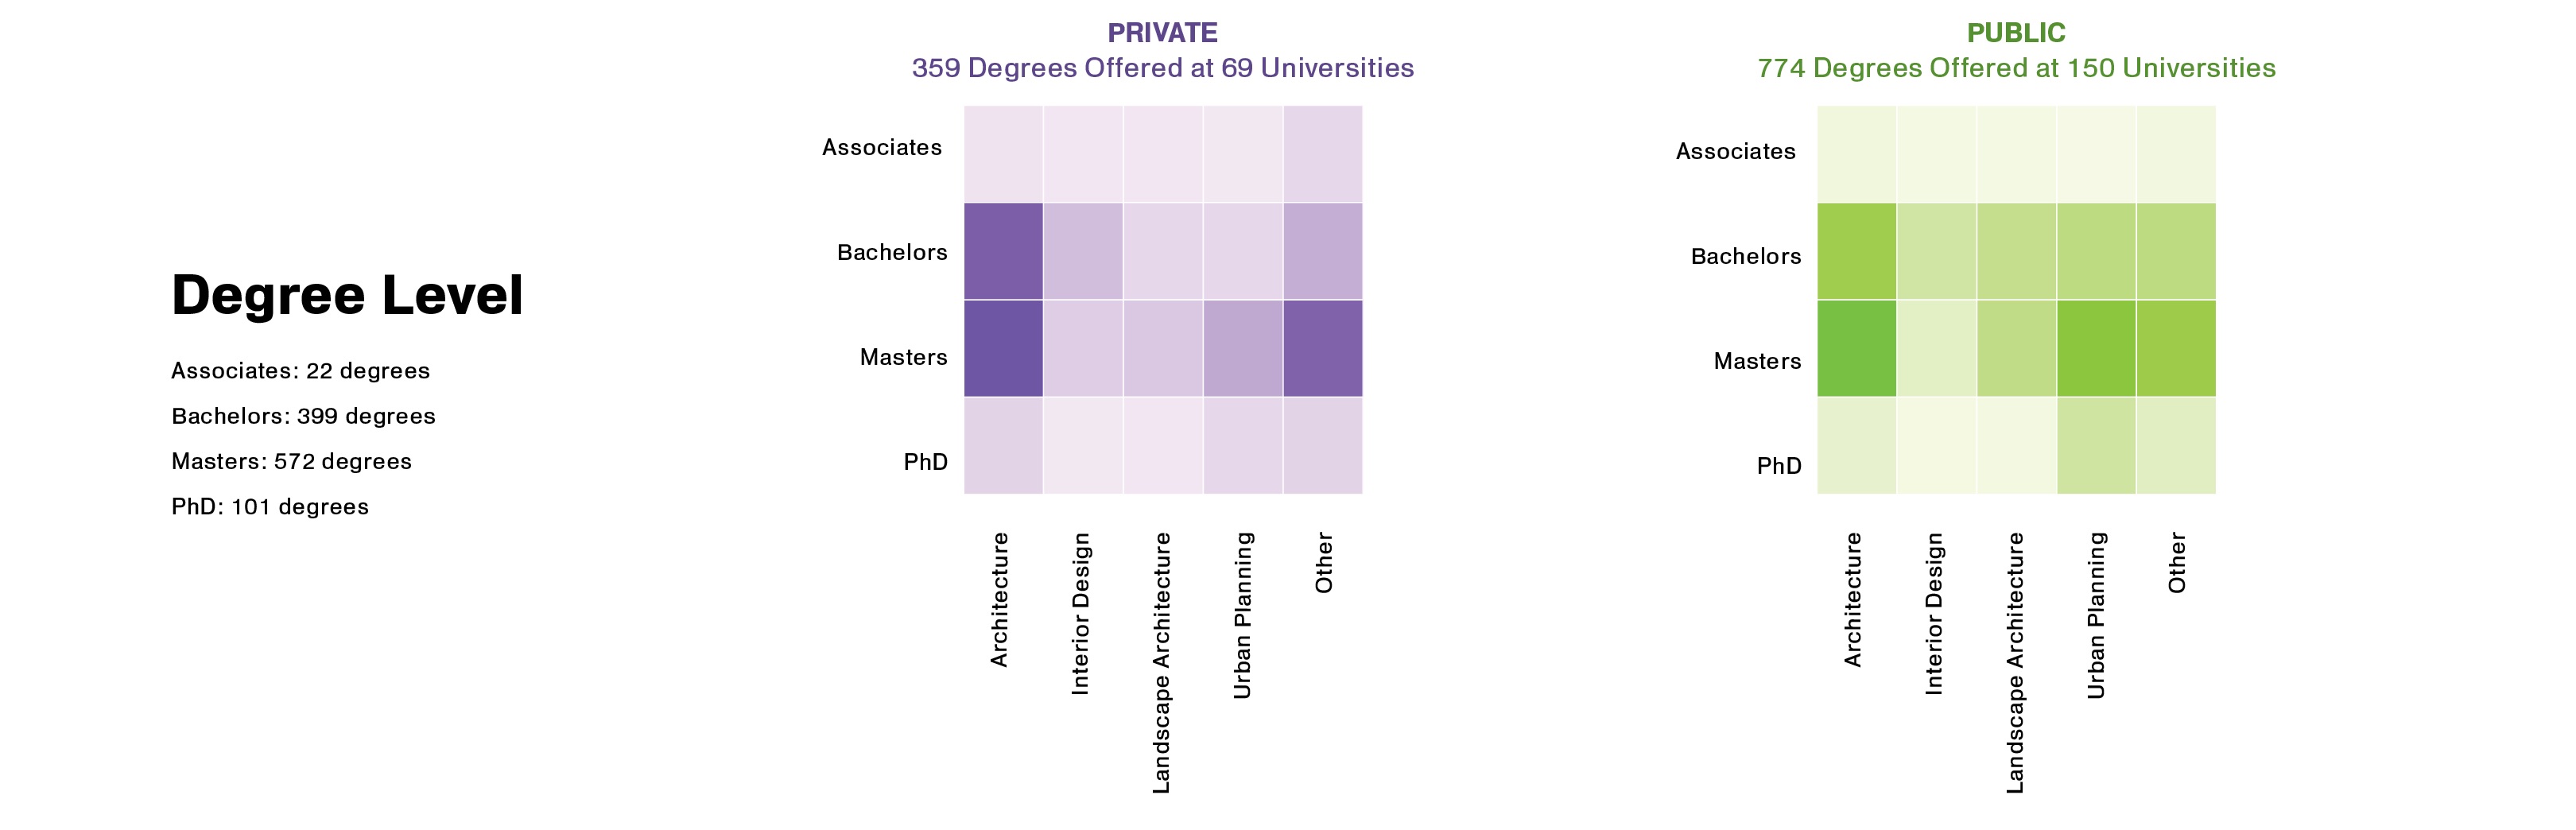 Degrees by Level in Private and Public Universities 